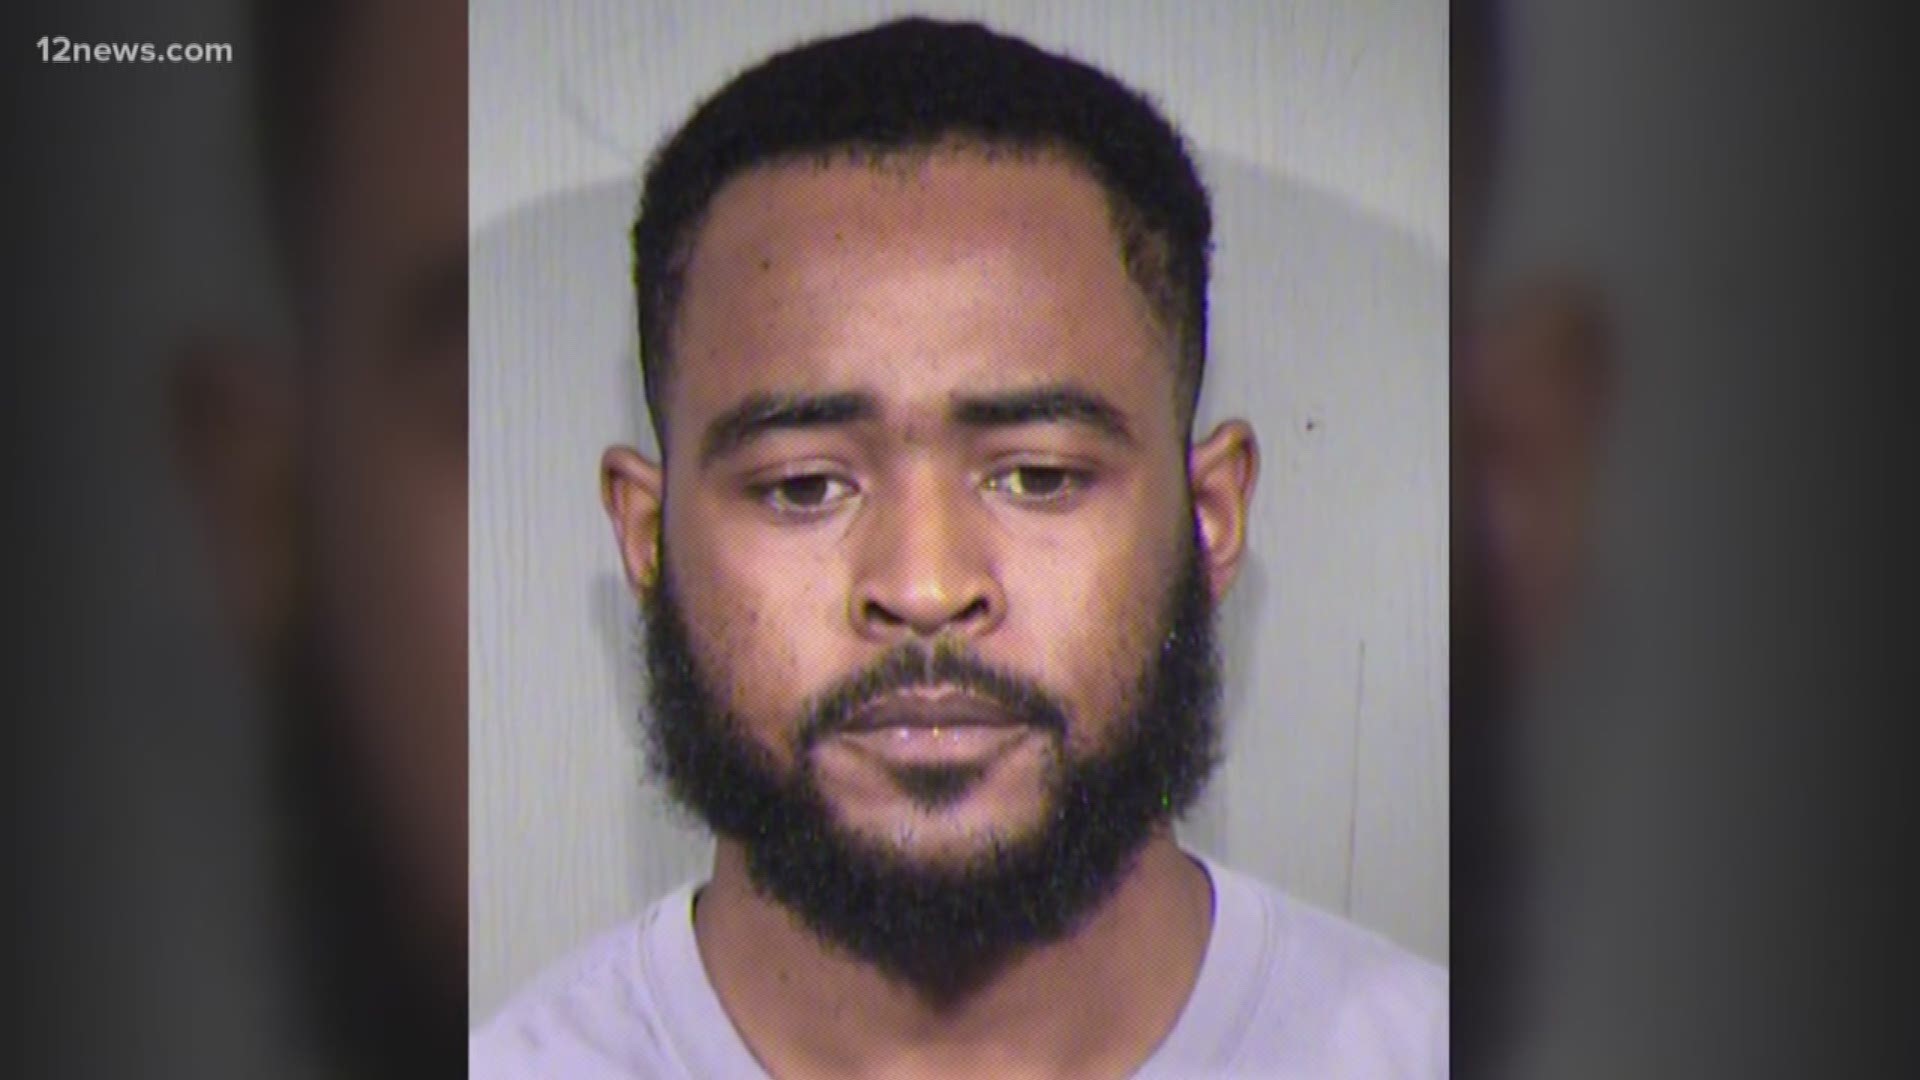 Jon Clark was arrested on unrelated charges last month but now Phoenix police say the have cause to charge him with first degree murder. Kiera's parents spoke about the possible charges from their home in California.